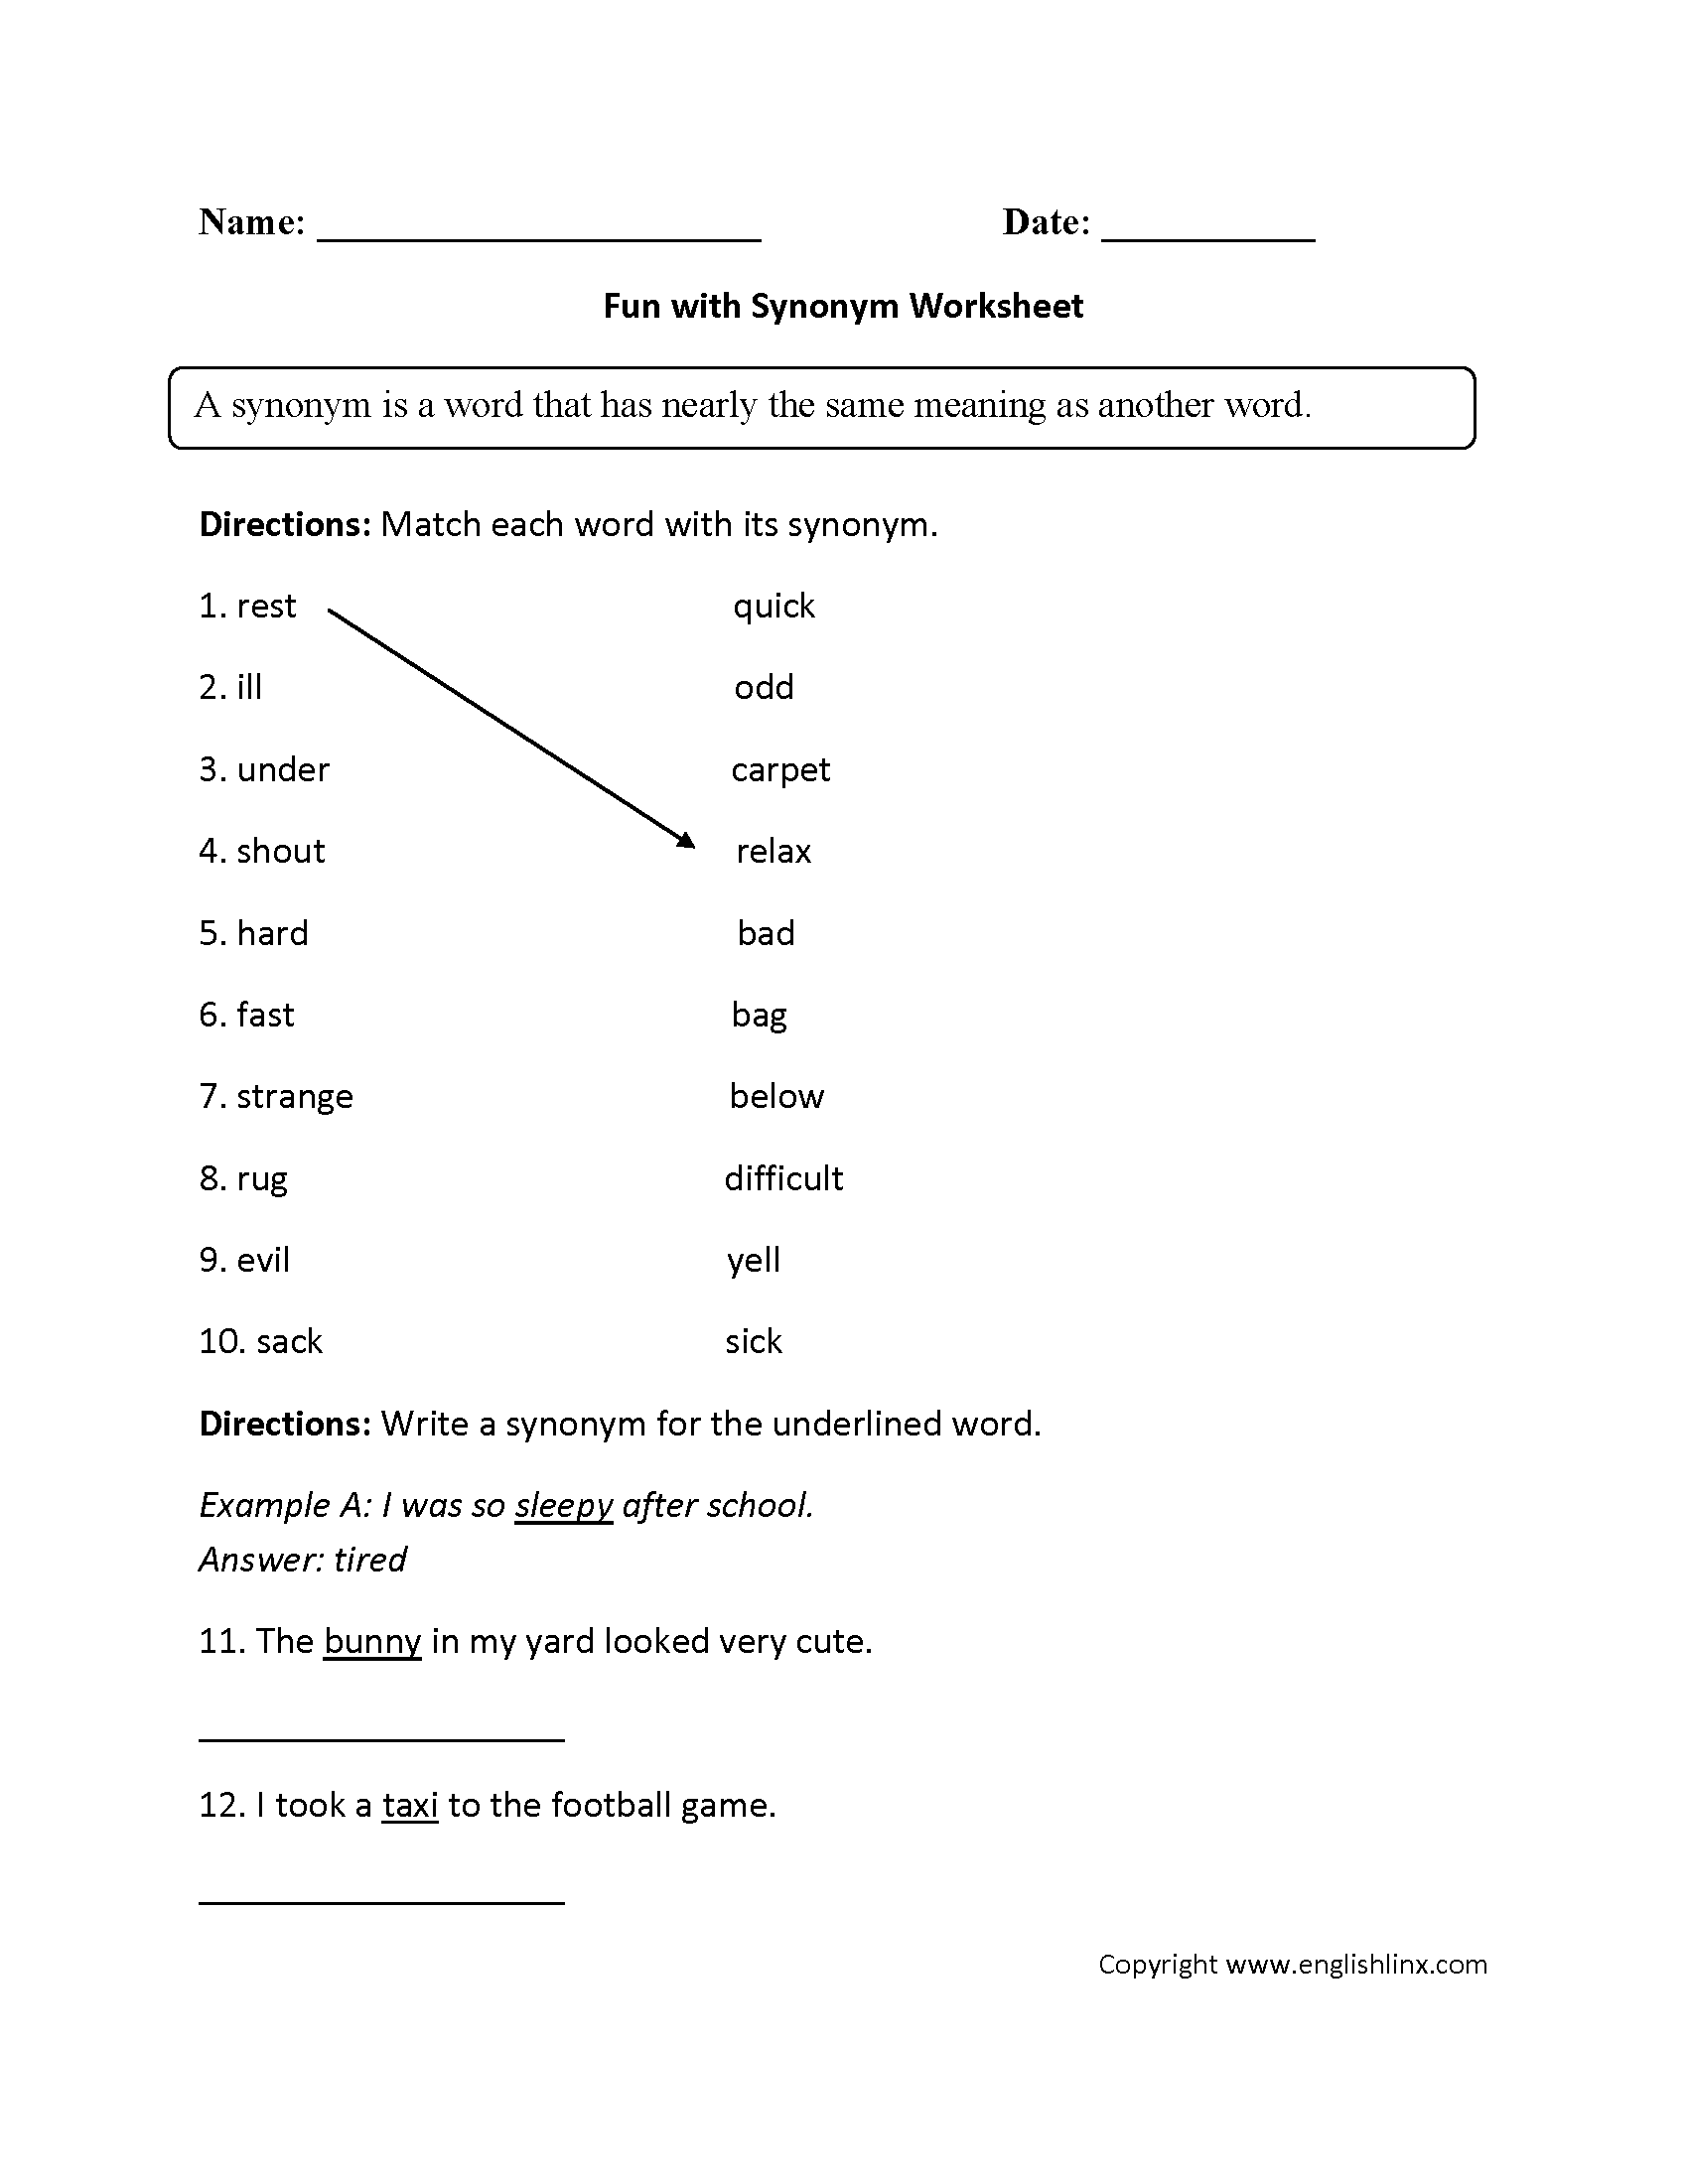 Fun with Synonyms Worksheet